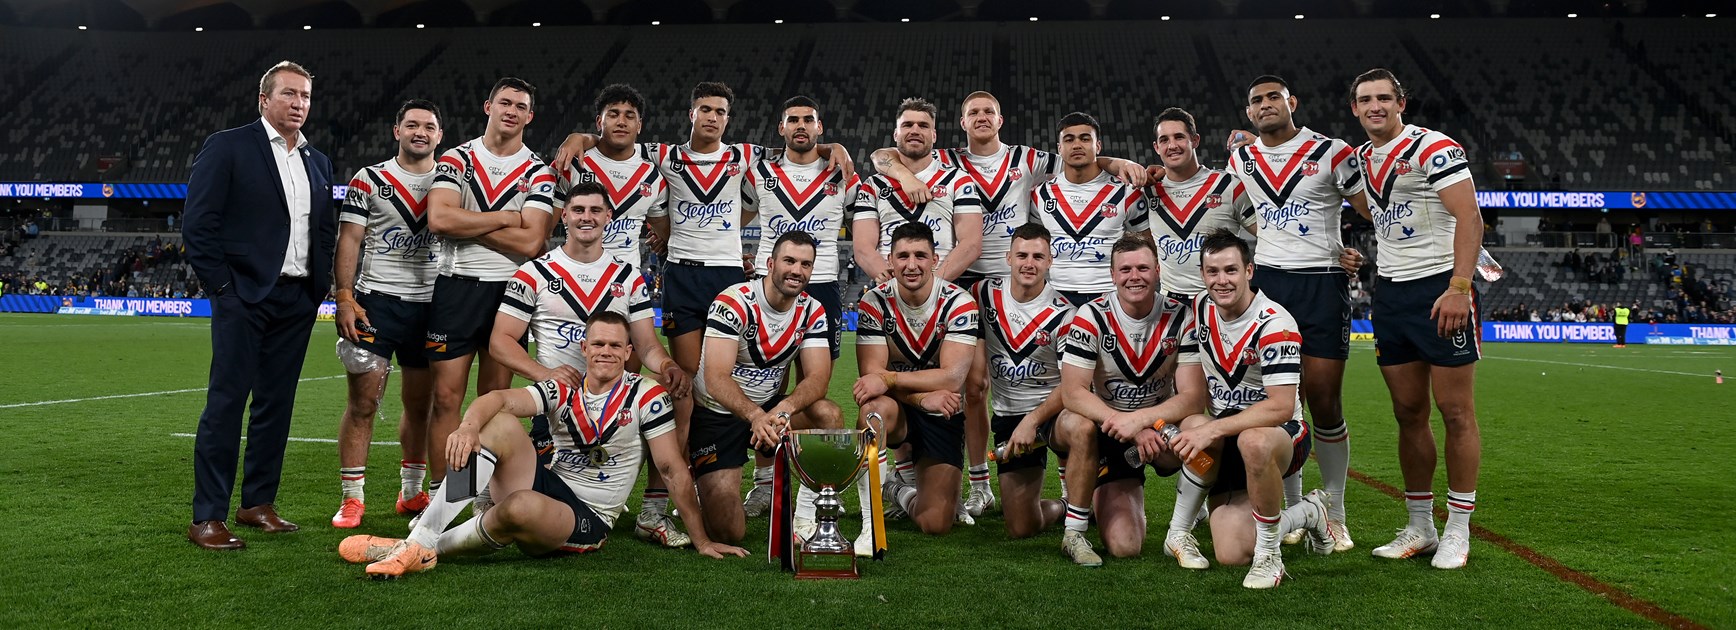 Easts Pump Parramatta to Claim Jack Gibson Cup